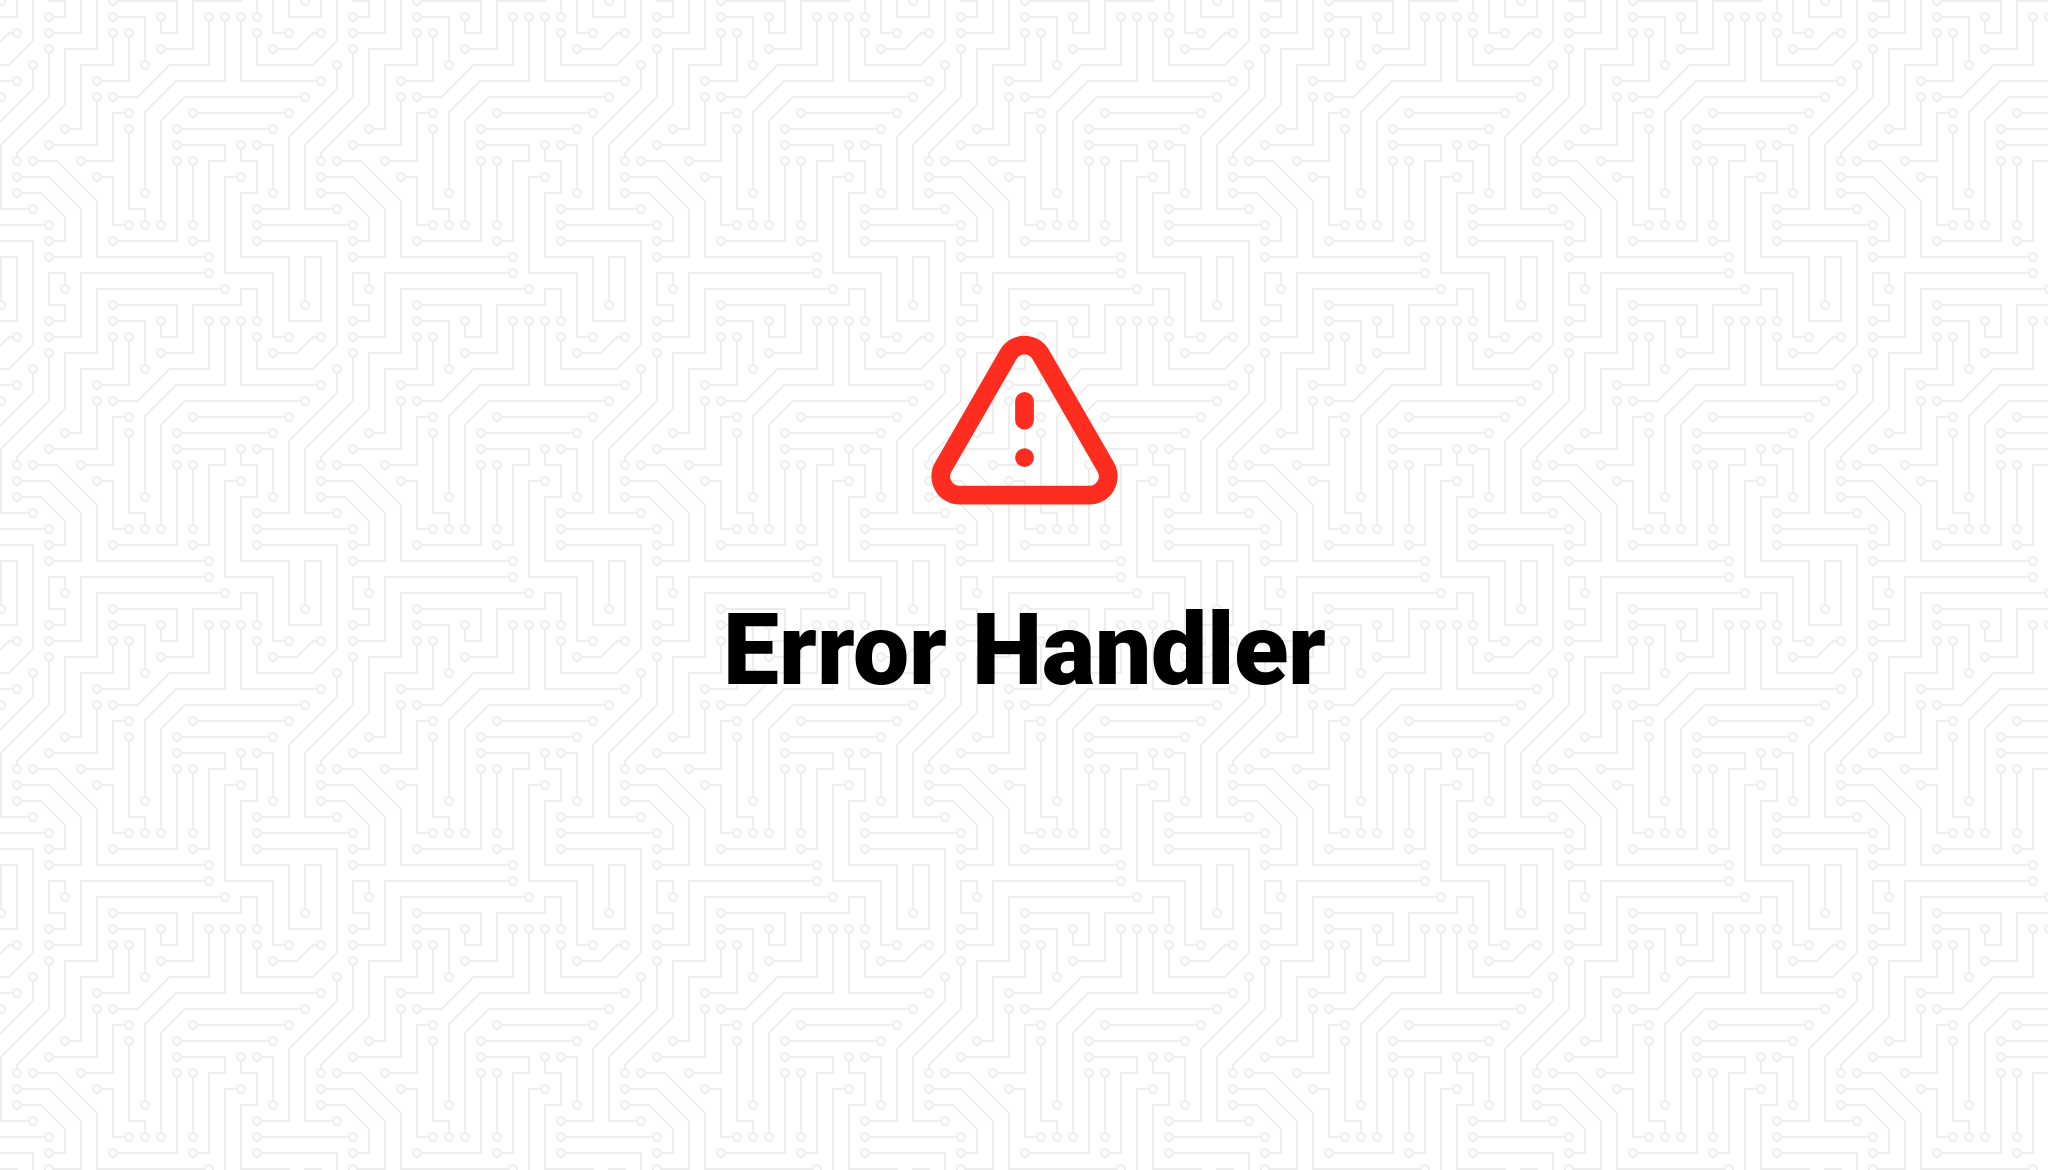 Error%20Handler.png?theme=light&pattern=architect&style=style_1&md=1&showWatermark=0&fontSize=100px&images=exclamation&widths=auto